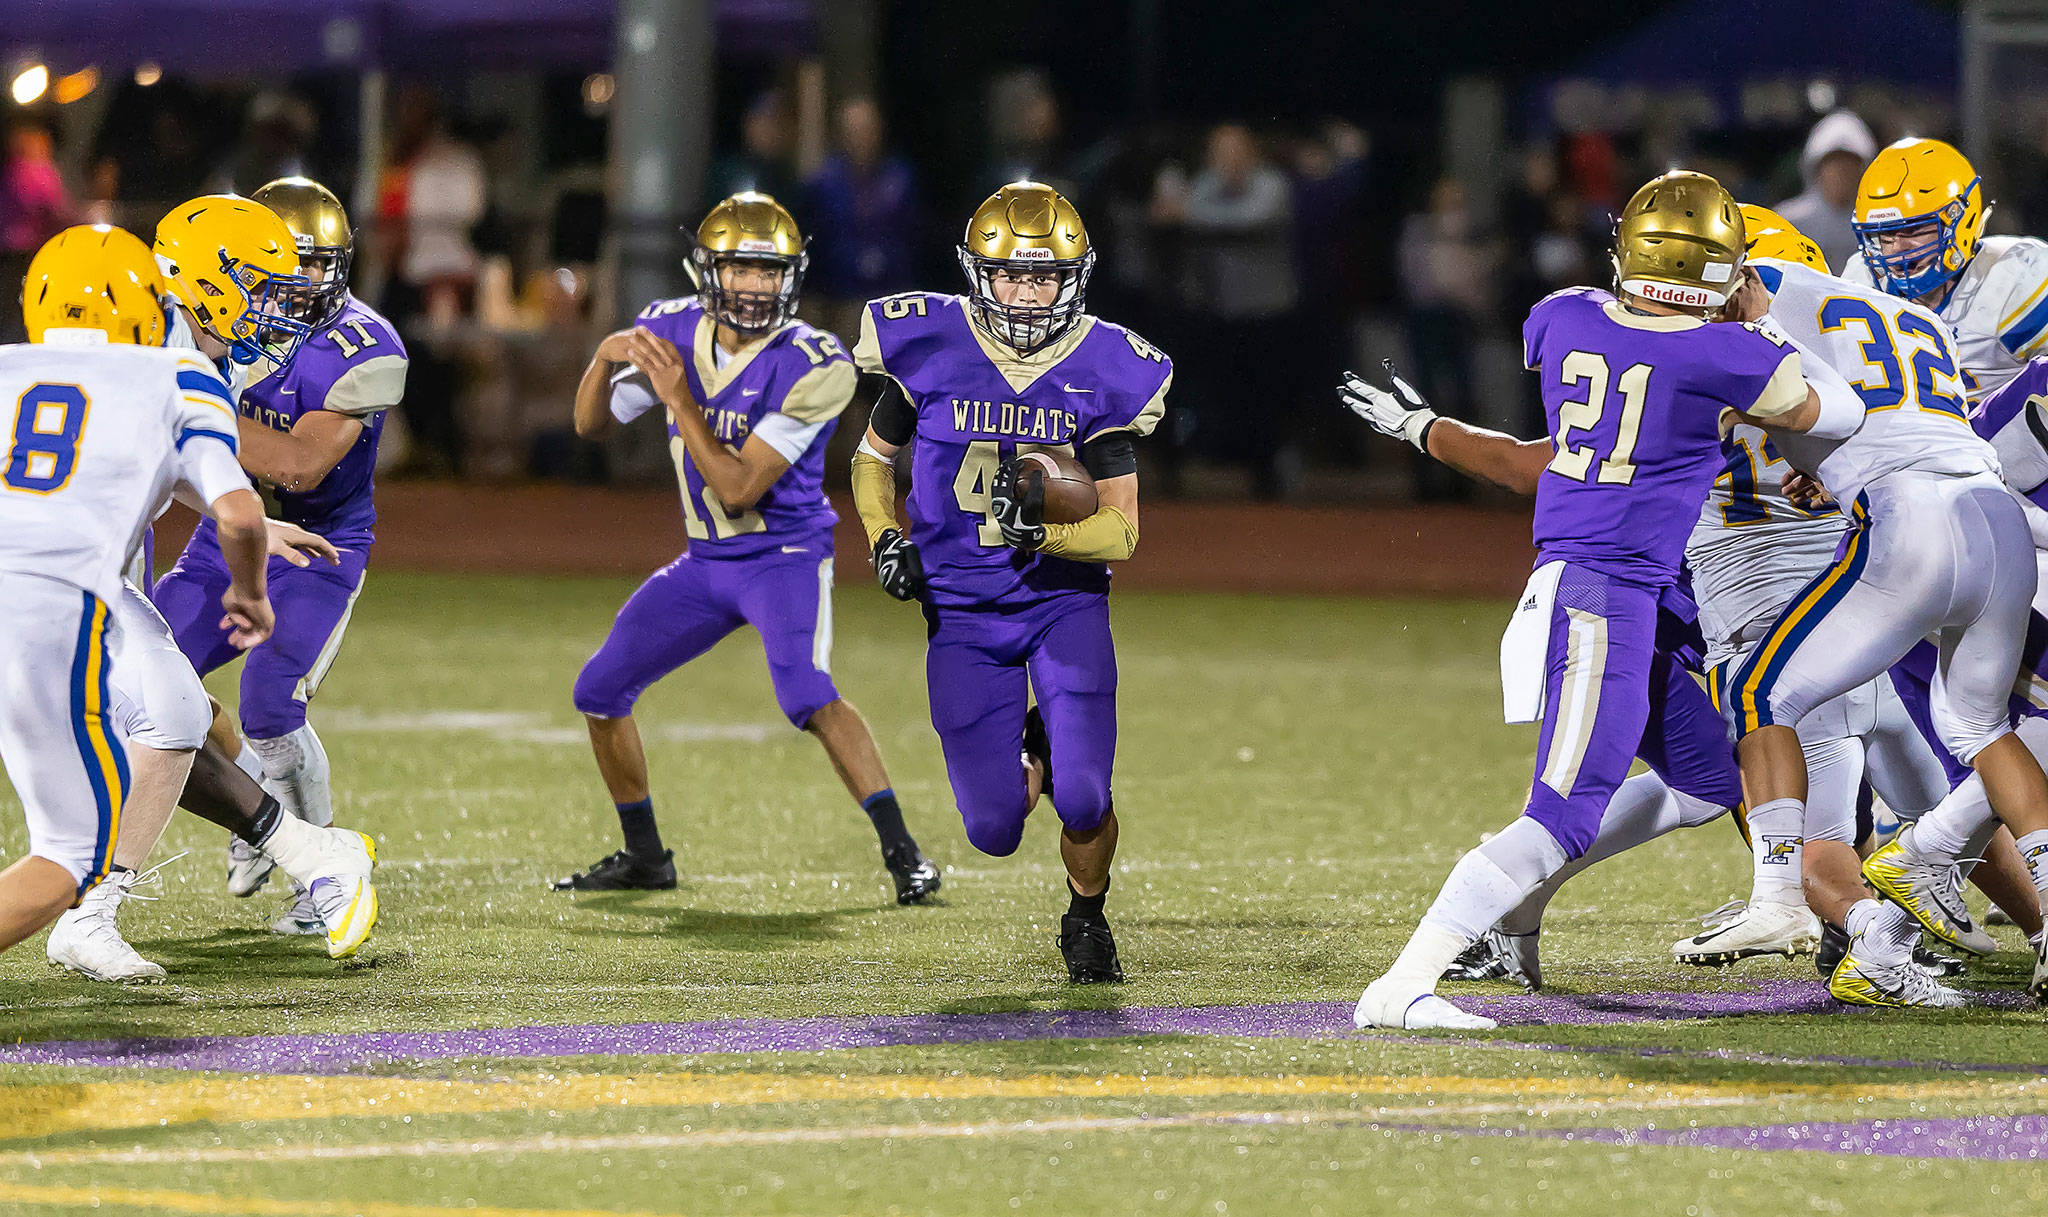 Caden Leckelt (45) rushes through a huge hole created in part by Aaron Martinez (11) and Calvin Whelpley (21) as quarterback Caleb Fitzgerald looks on.(Photo by John Fisken)